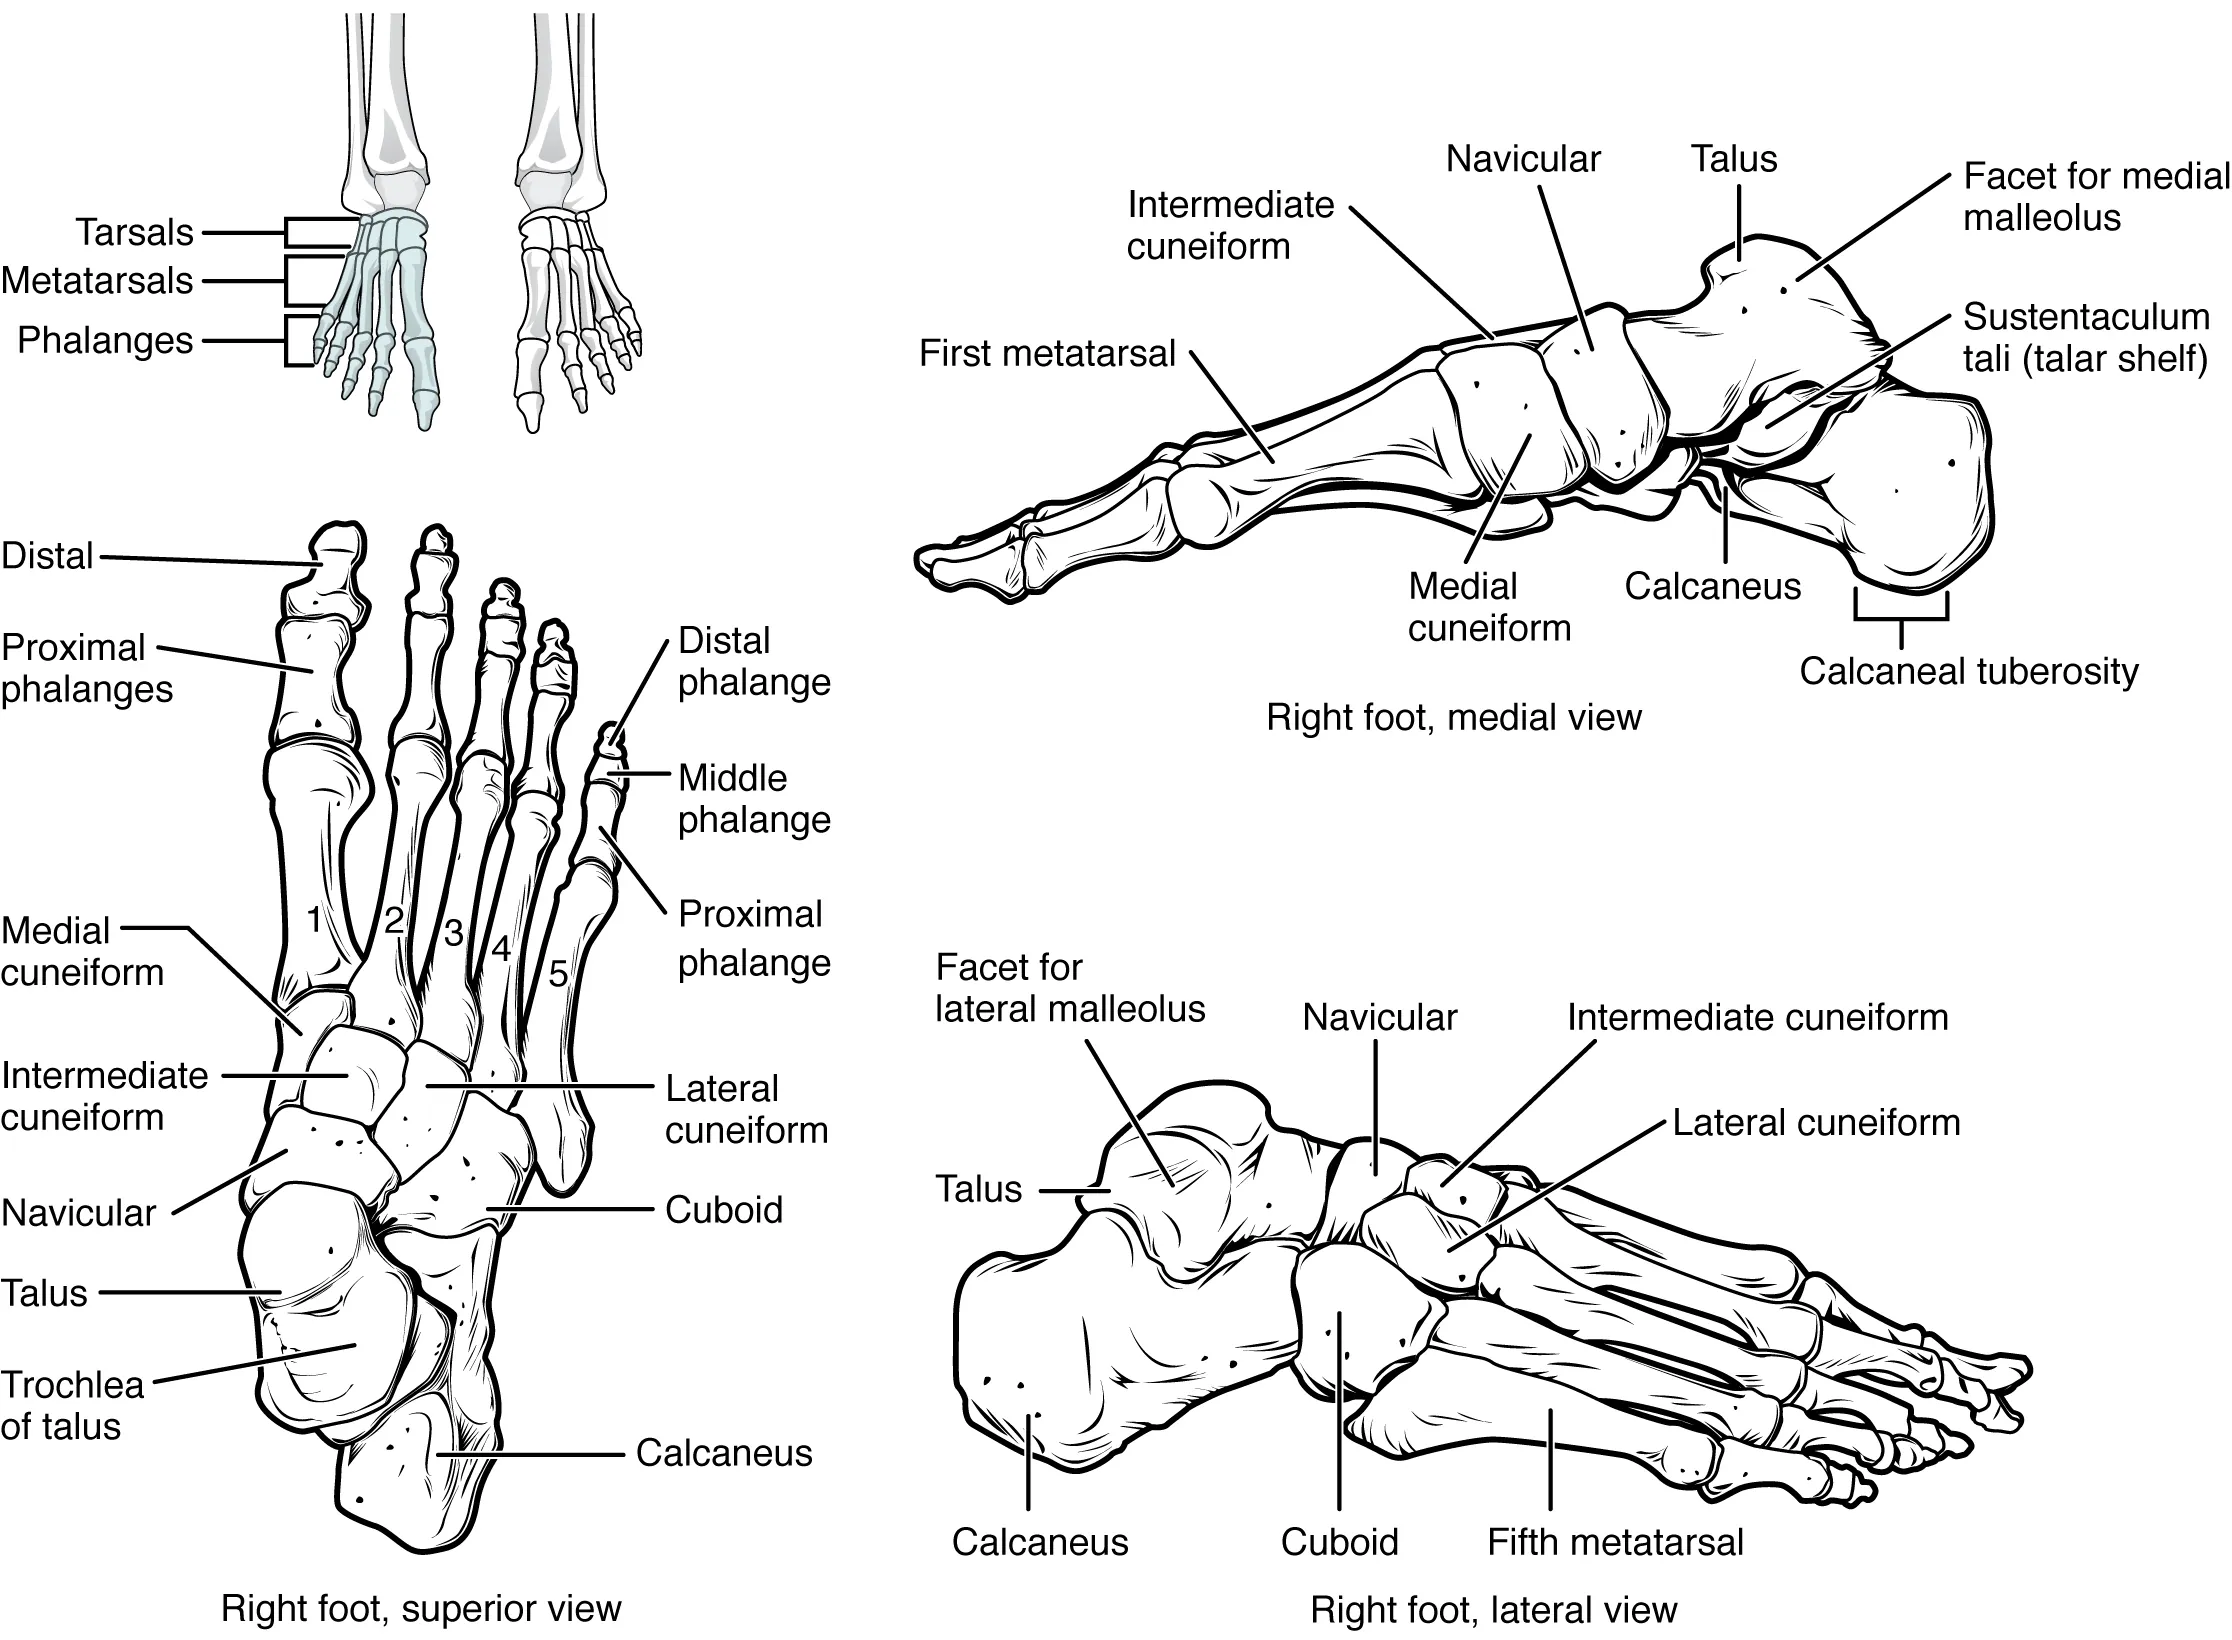 This figure shows the bones of the foot. The left panel shows the superior view, the top right panel shows the medial view, and the bottom right panel shows the lateral view.